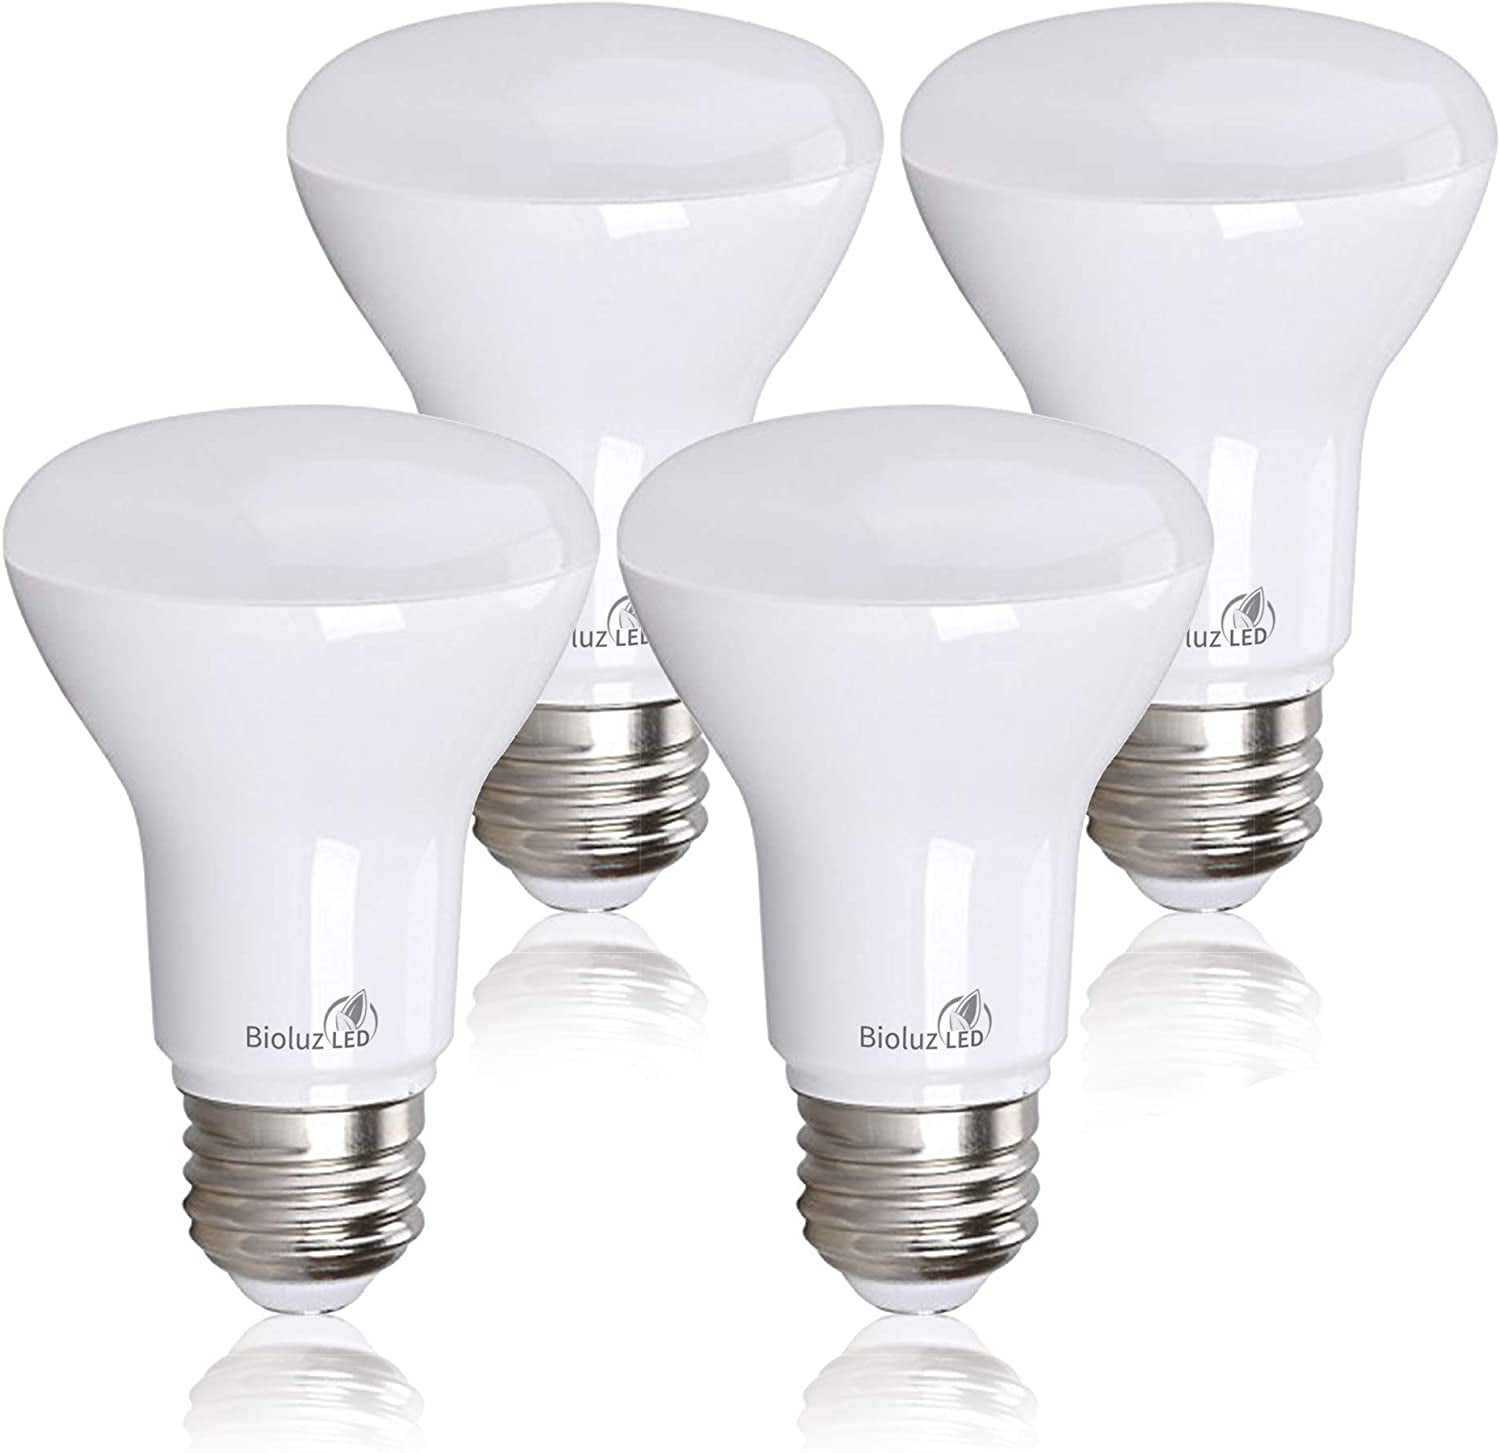 4 Pack BR20 LED Bulb 3000K White 6W 50 Replacement 90 CRI 540 Lumen Indoor/Outdoor UL Listed CEC Title 20 Compliant of 4) - Walmart.com